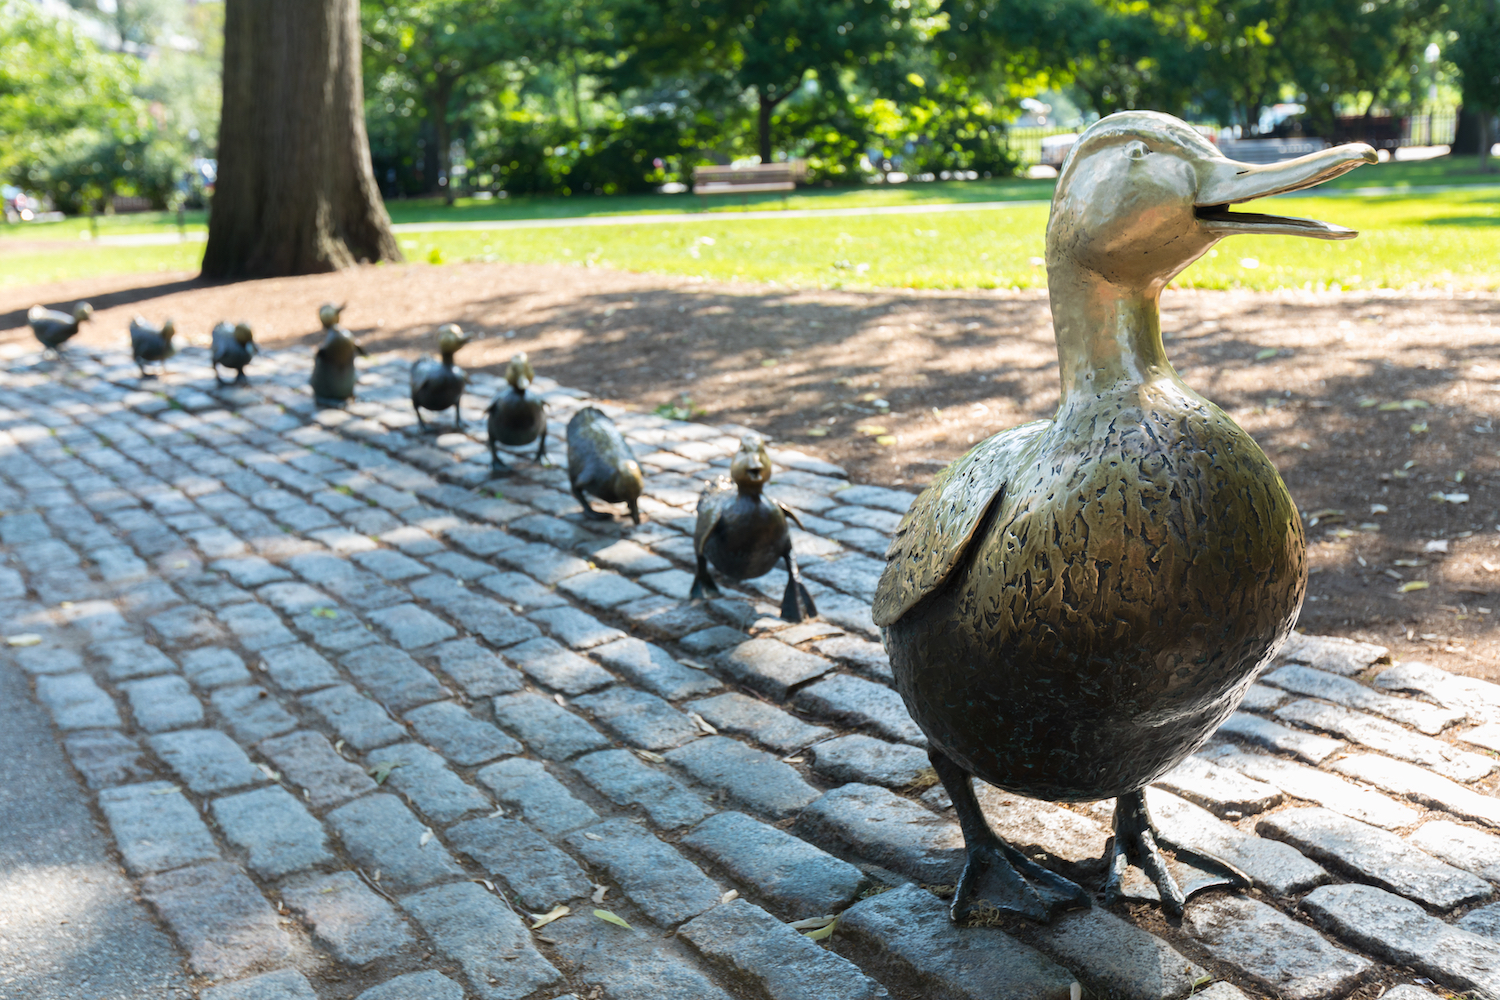 The Make Way For Ducklings sculptures at the Boston Public Garden.